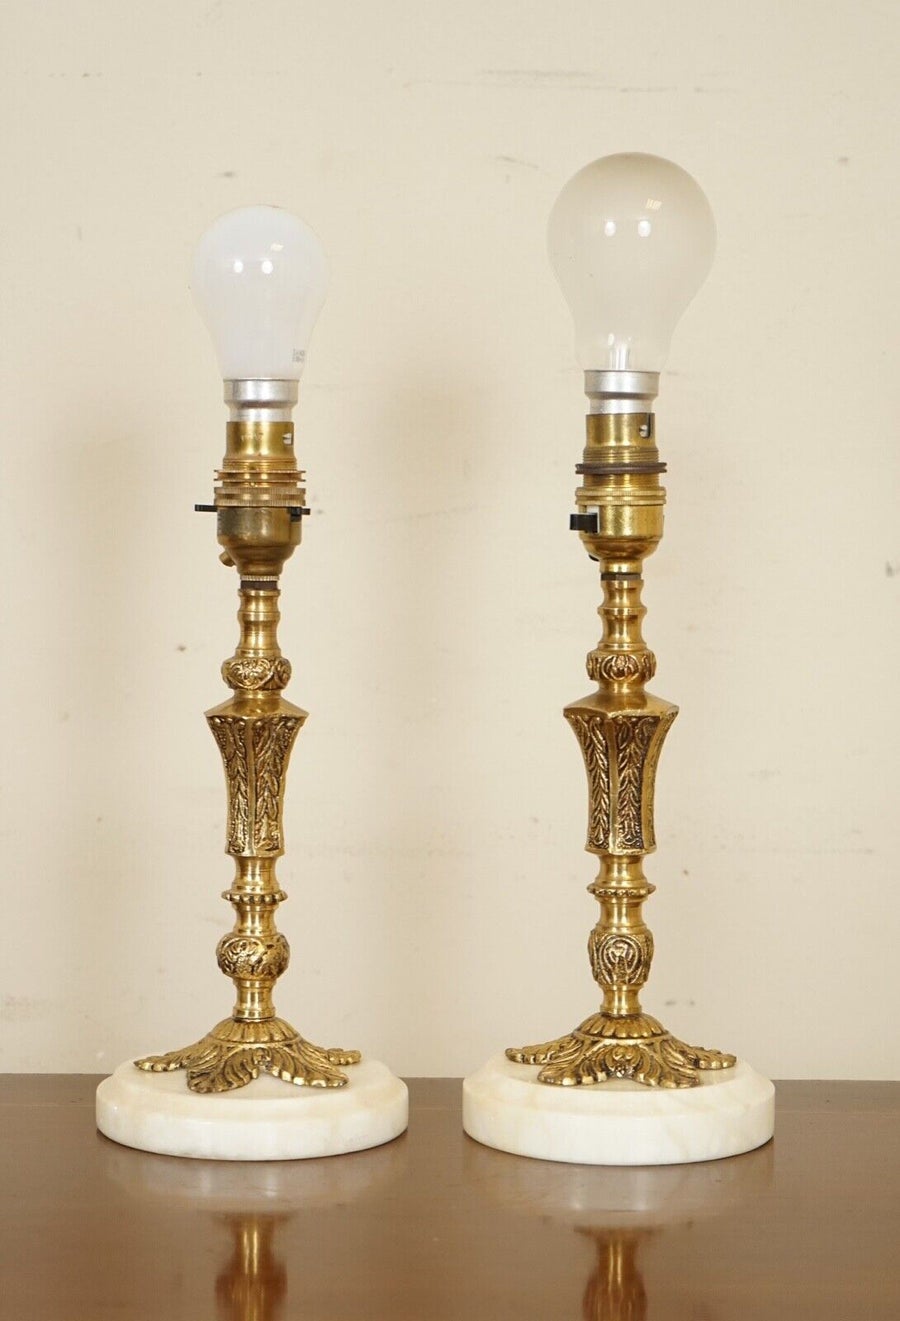 We are delighted to offer for sale these 1960s very decorative brass & onyx Italian lamps.

Lightly restored this by giving it a hand clean and hand polished. 

Dimensions: Ø 11 x 25 H cm

Please carefully look at the pictures to see the